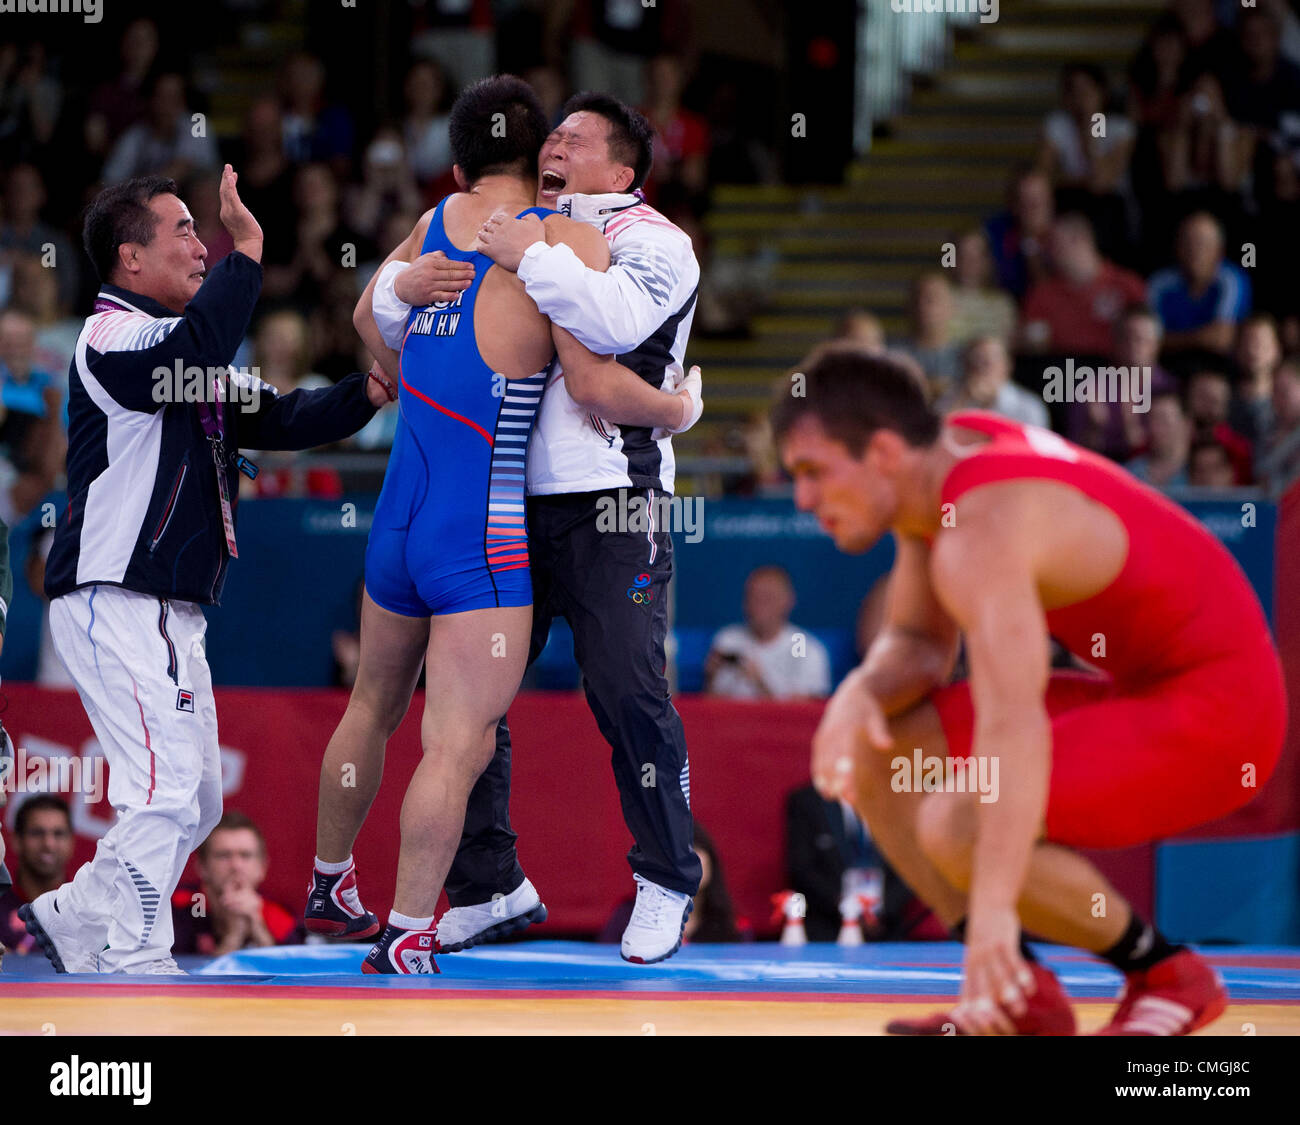 Aug. 7, 2012 - London, England, United Kingdom - HYEONWOO KIM (South Korea) hugs his coach as he advances to the semifinal after beating STEEVEKEM GUENOT (France) in the Wrestling Greco-Roman 66kg competition during the London Olympics 2012 at the ExCel Centre. (Credit Image: © Paul Kitagaki Jr./ZUMAPRESS.com) Stock Photo